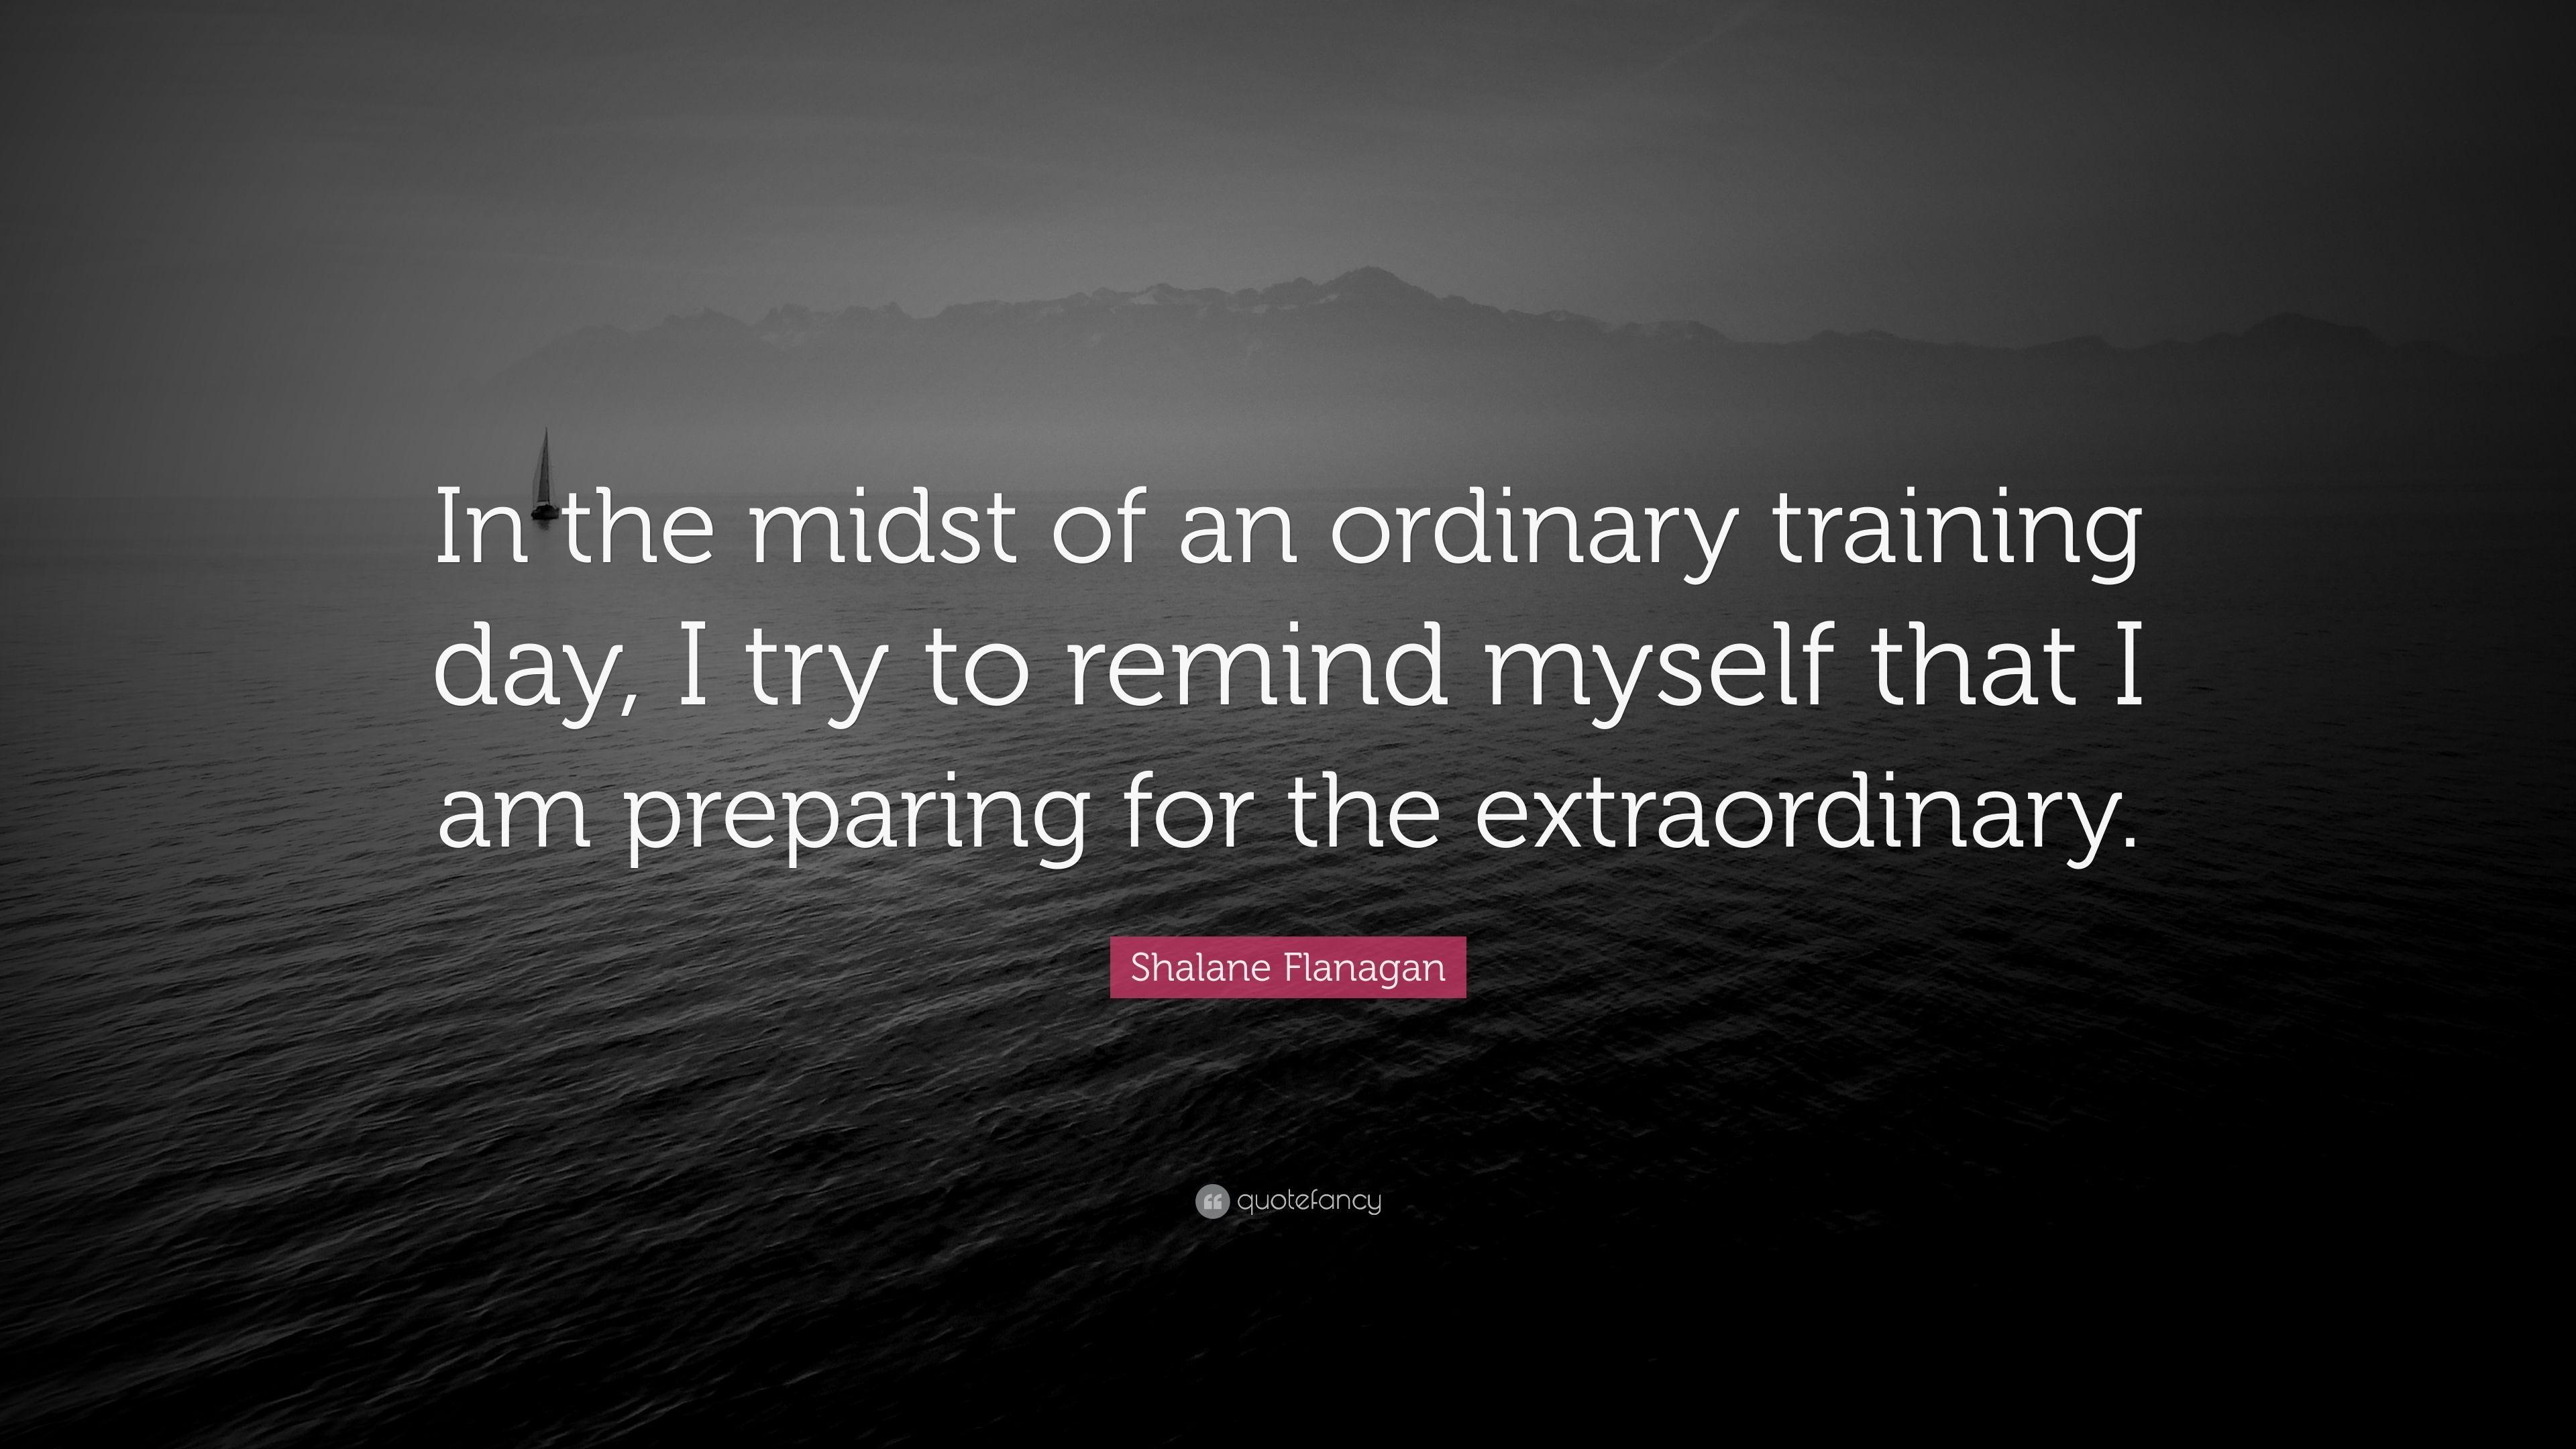 Shalane Flanagan Quote: “In the midst of an ordinary training day, I